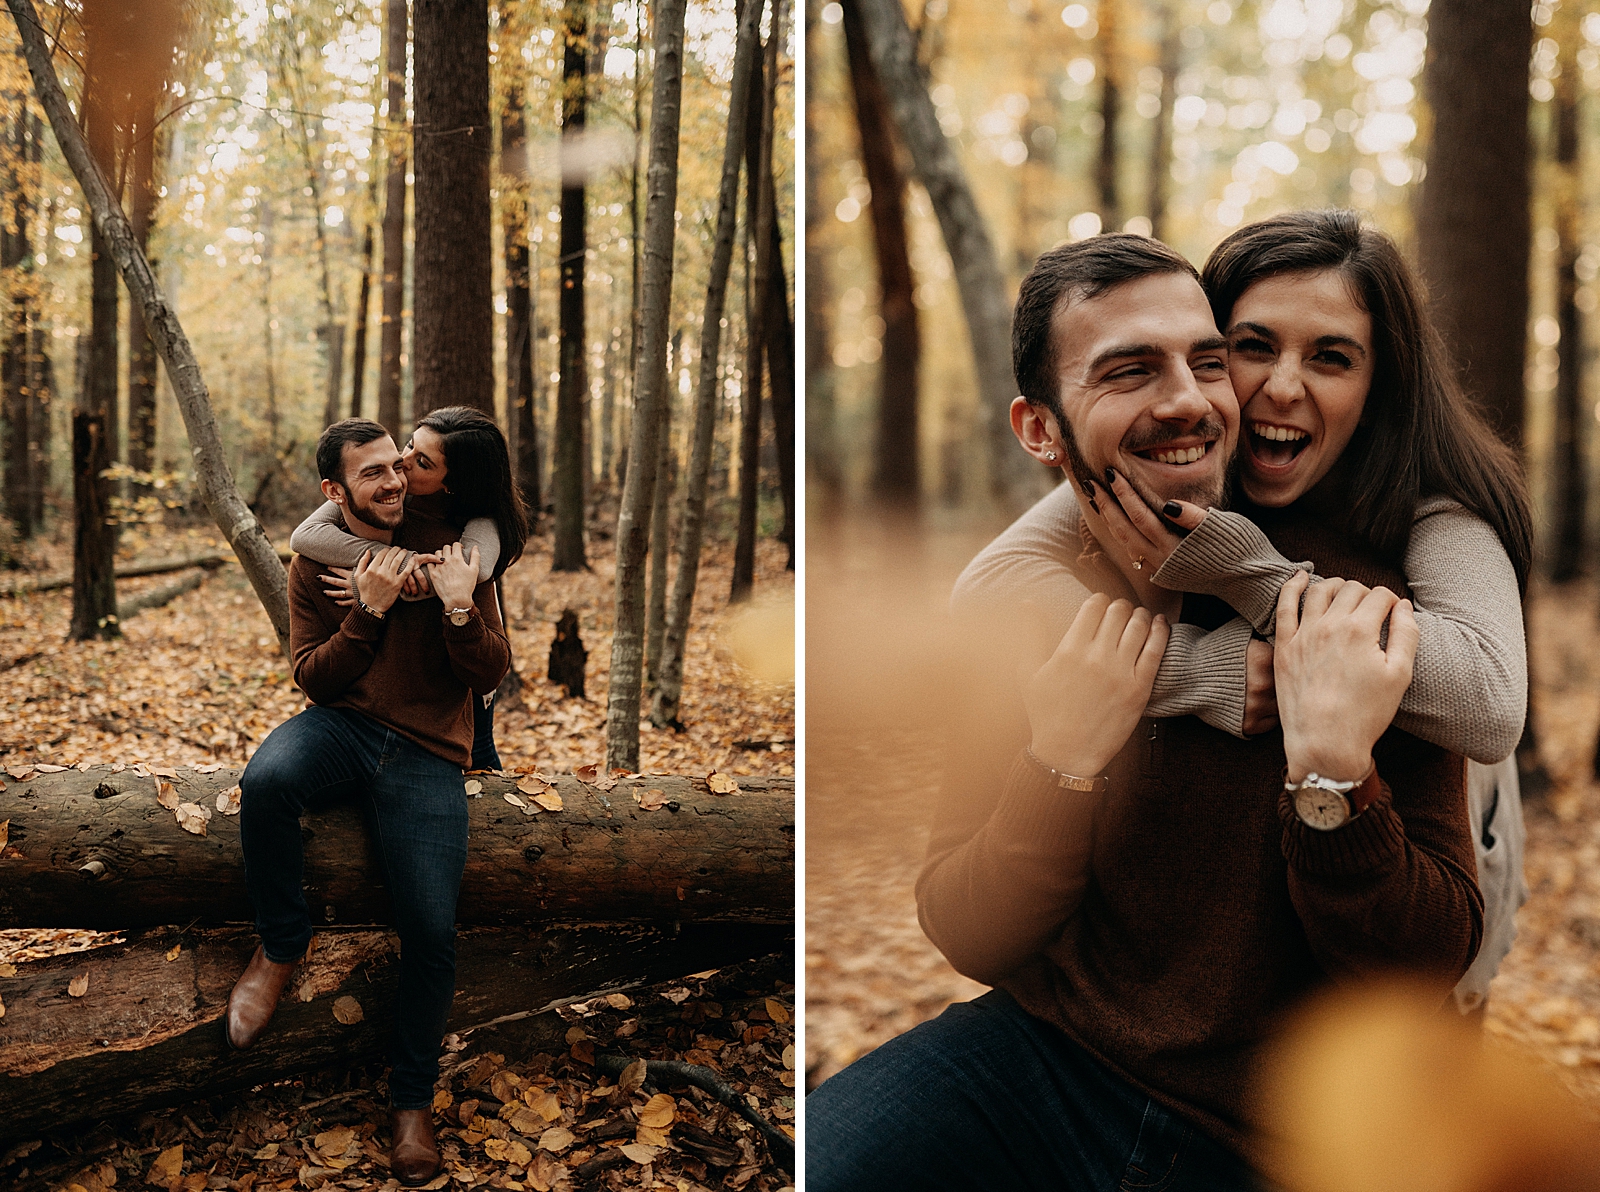 Woman holding man from behind who is sitting on fallen tree trunk in autumn forest